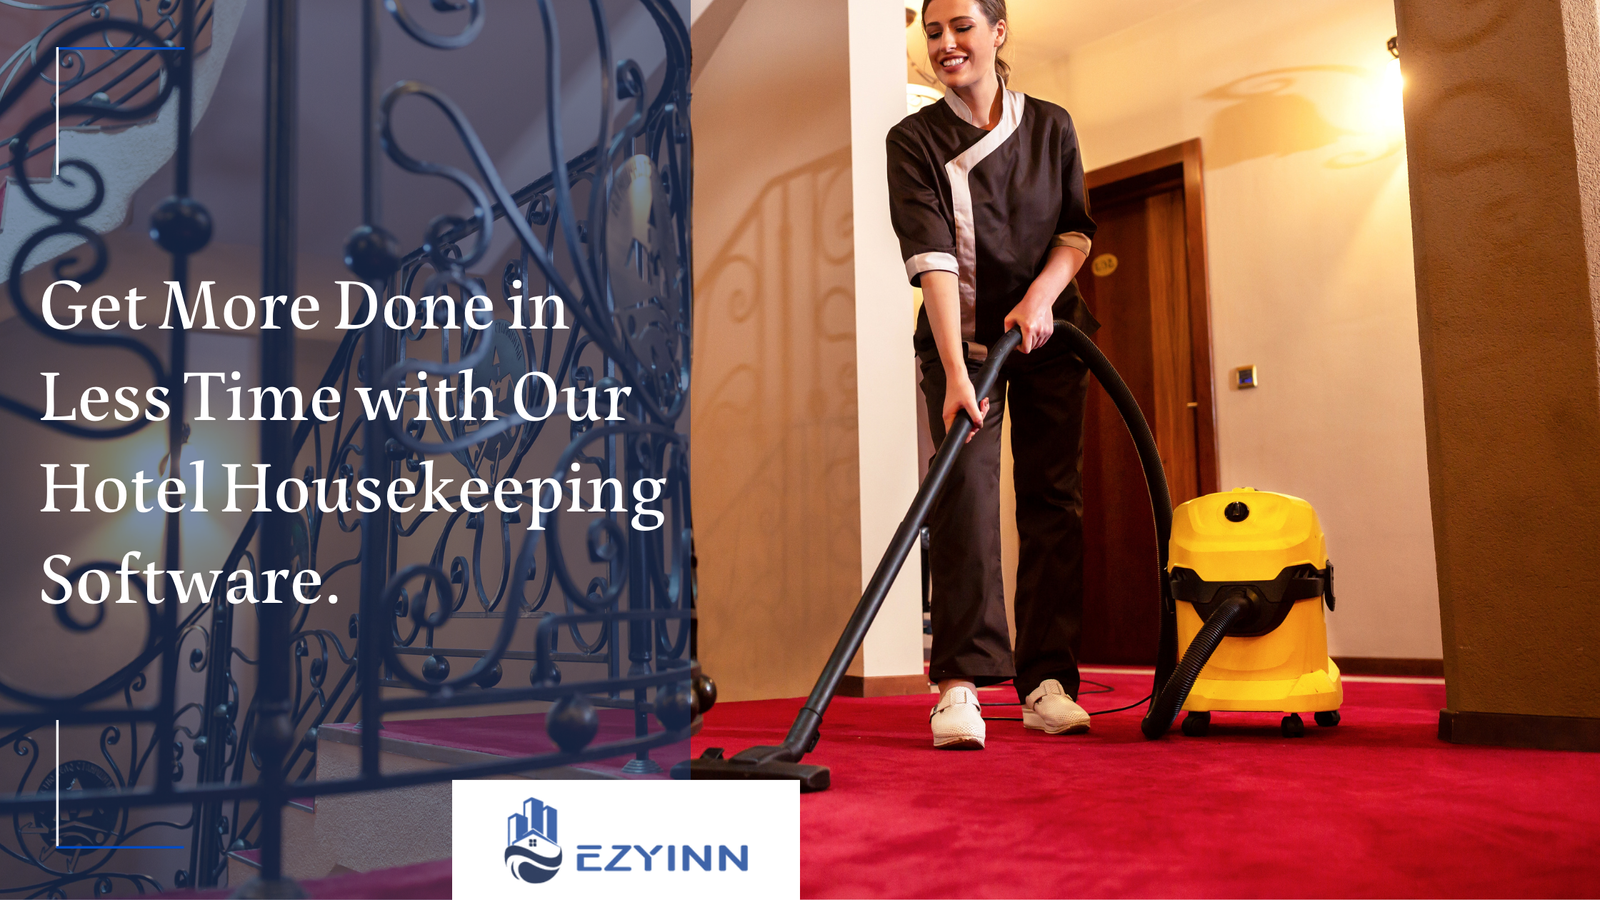 Get More Done in Less Time with Our Hotel Housekeeping Software. | Ezyinn PMS